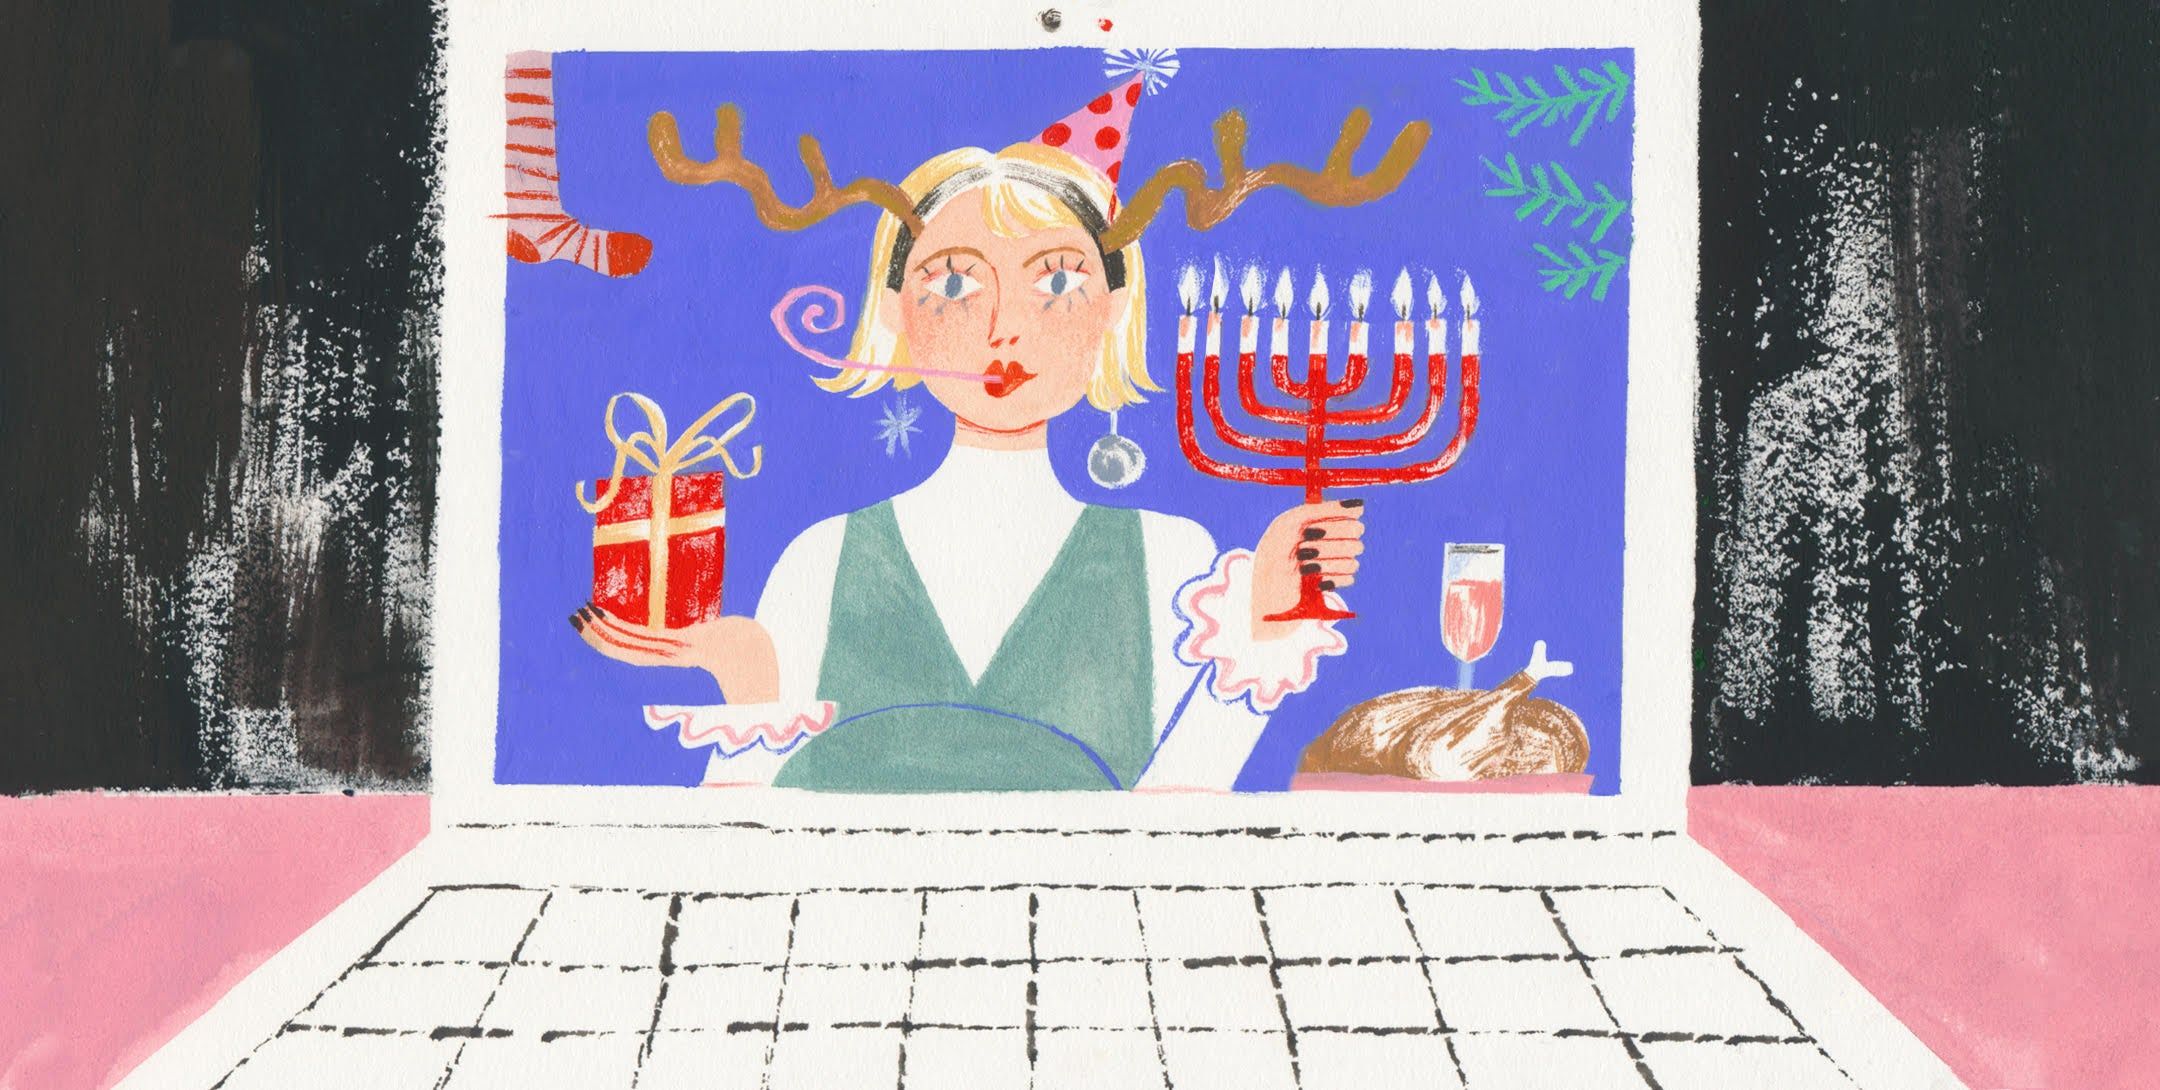 illustration of a woman on a laptop screen holding a gift in one hand and a menorah in the other